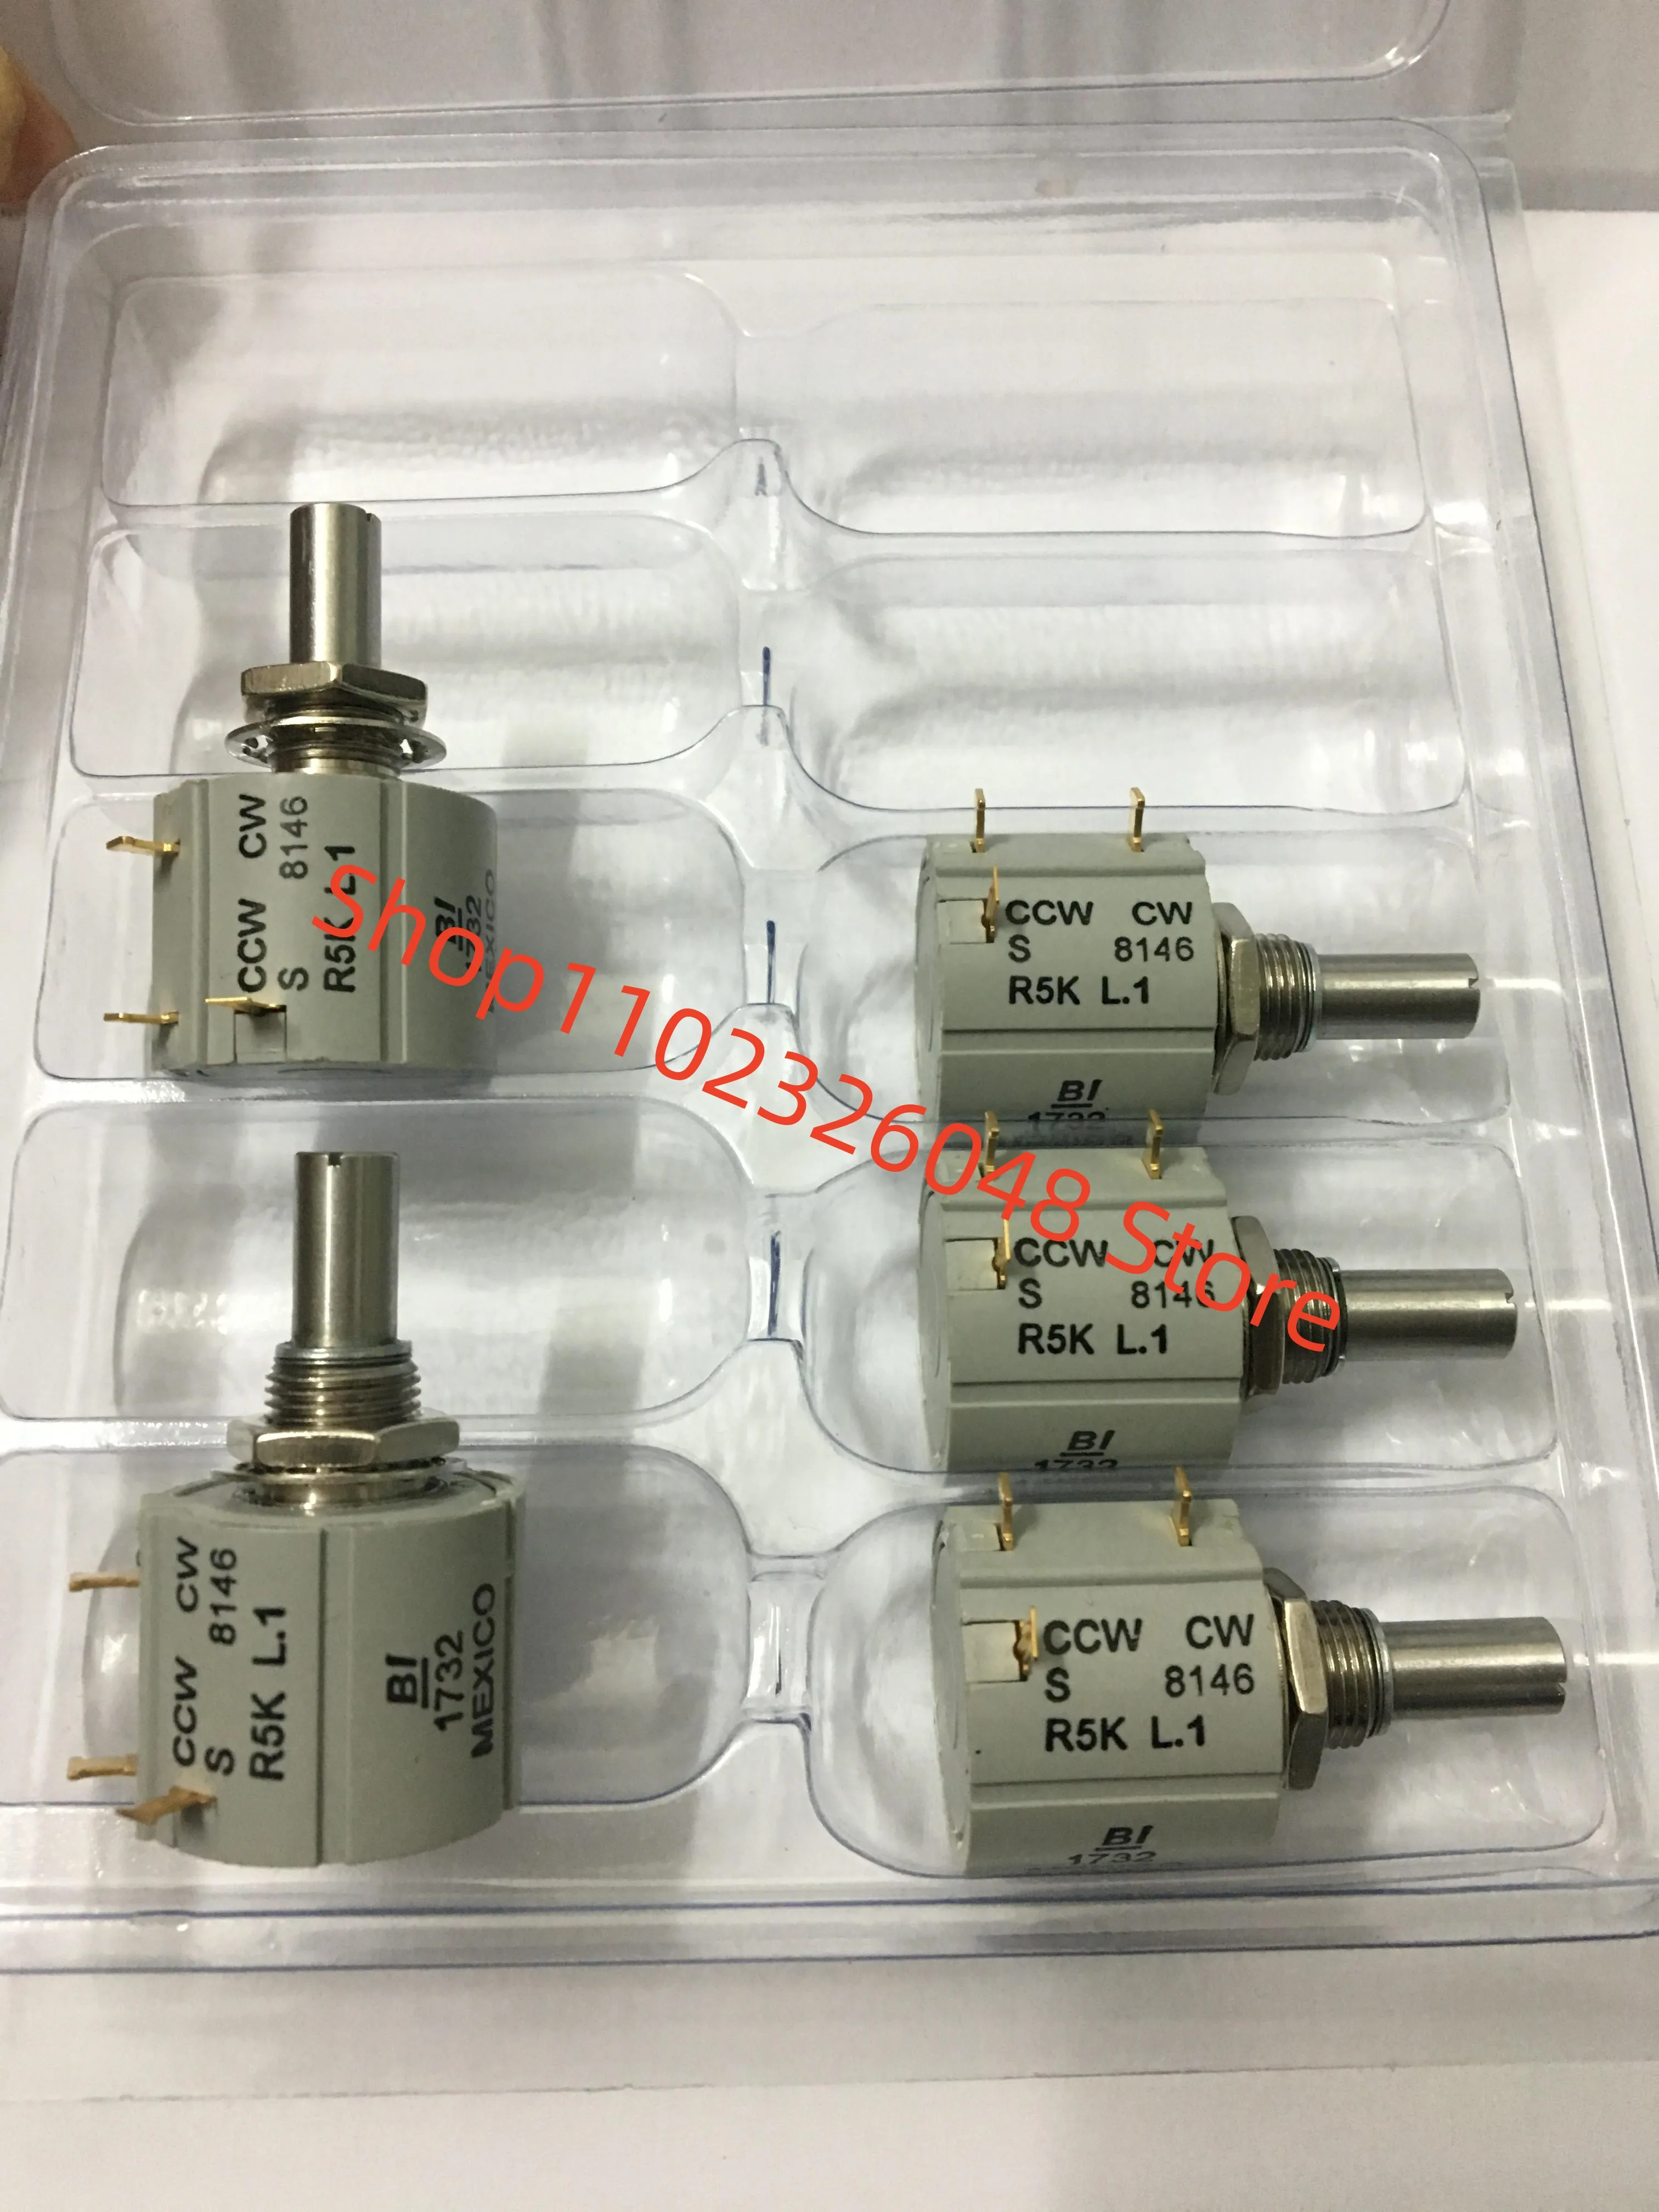 

1PCS 8416 High Precision 5K 10K Multi Coil 10 Coil Wire Wound Adjustable Potentiometer CCW CW S8146R5KL.1 R5K NEW IN STOCK